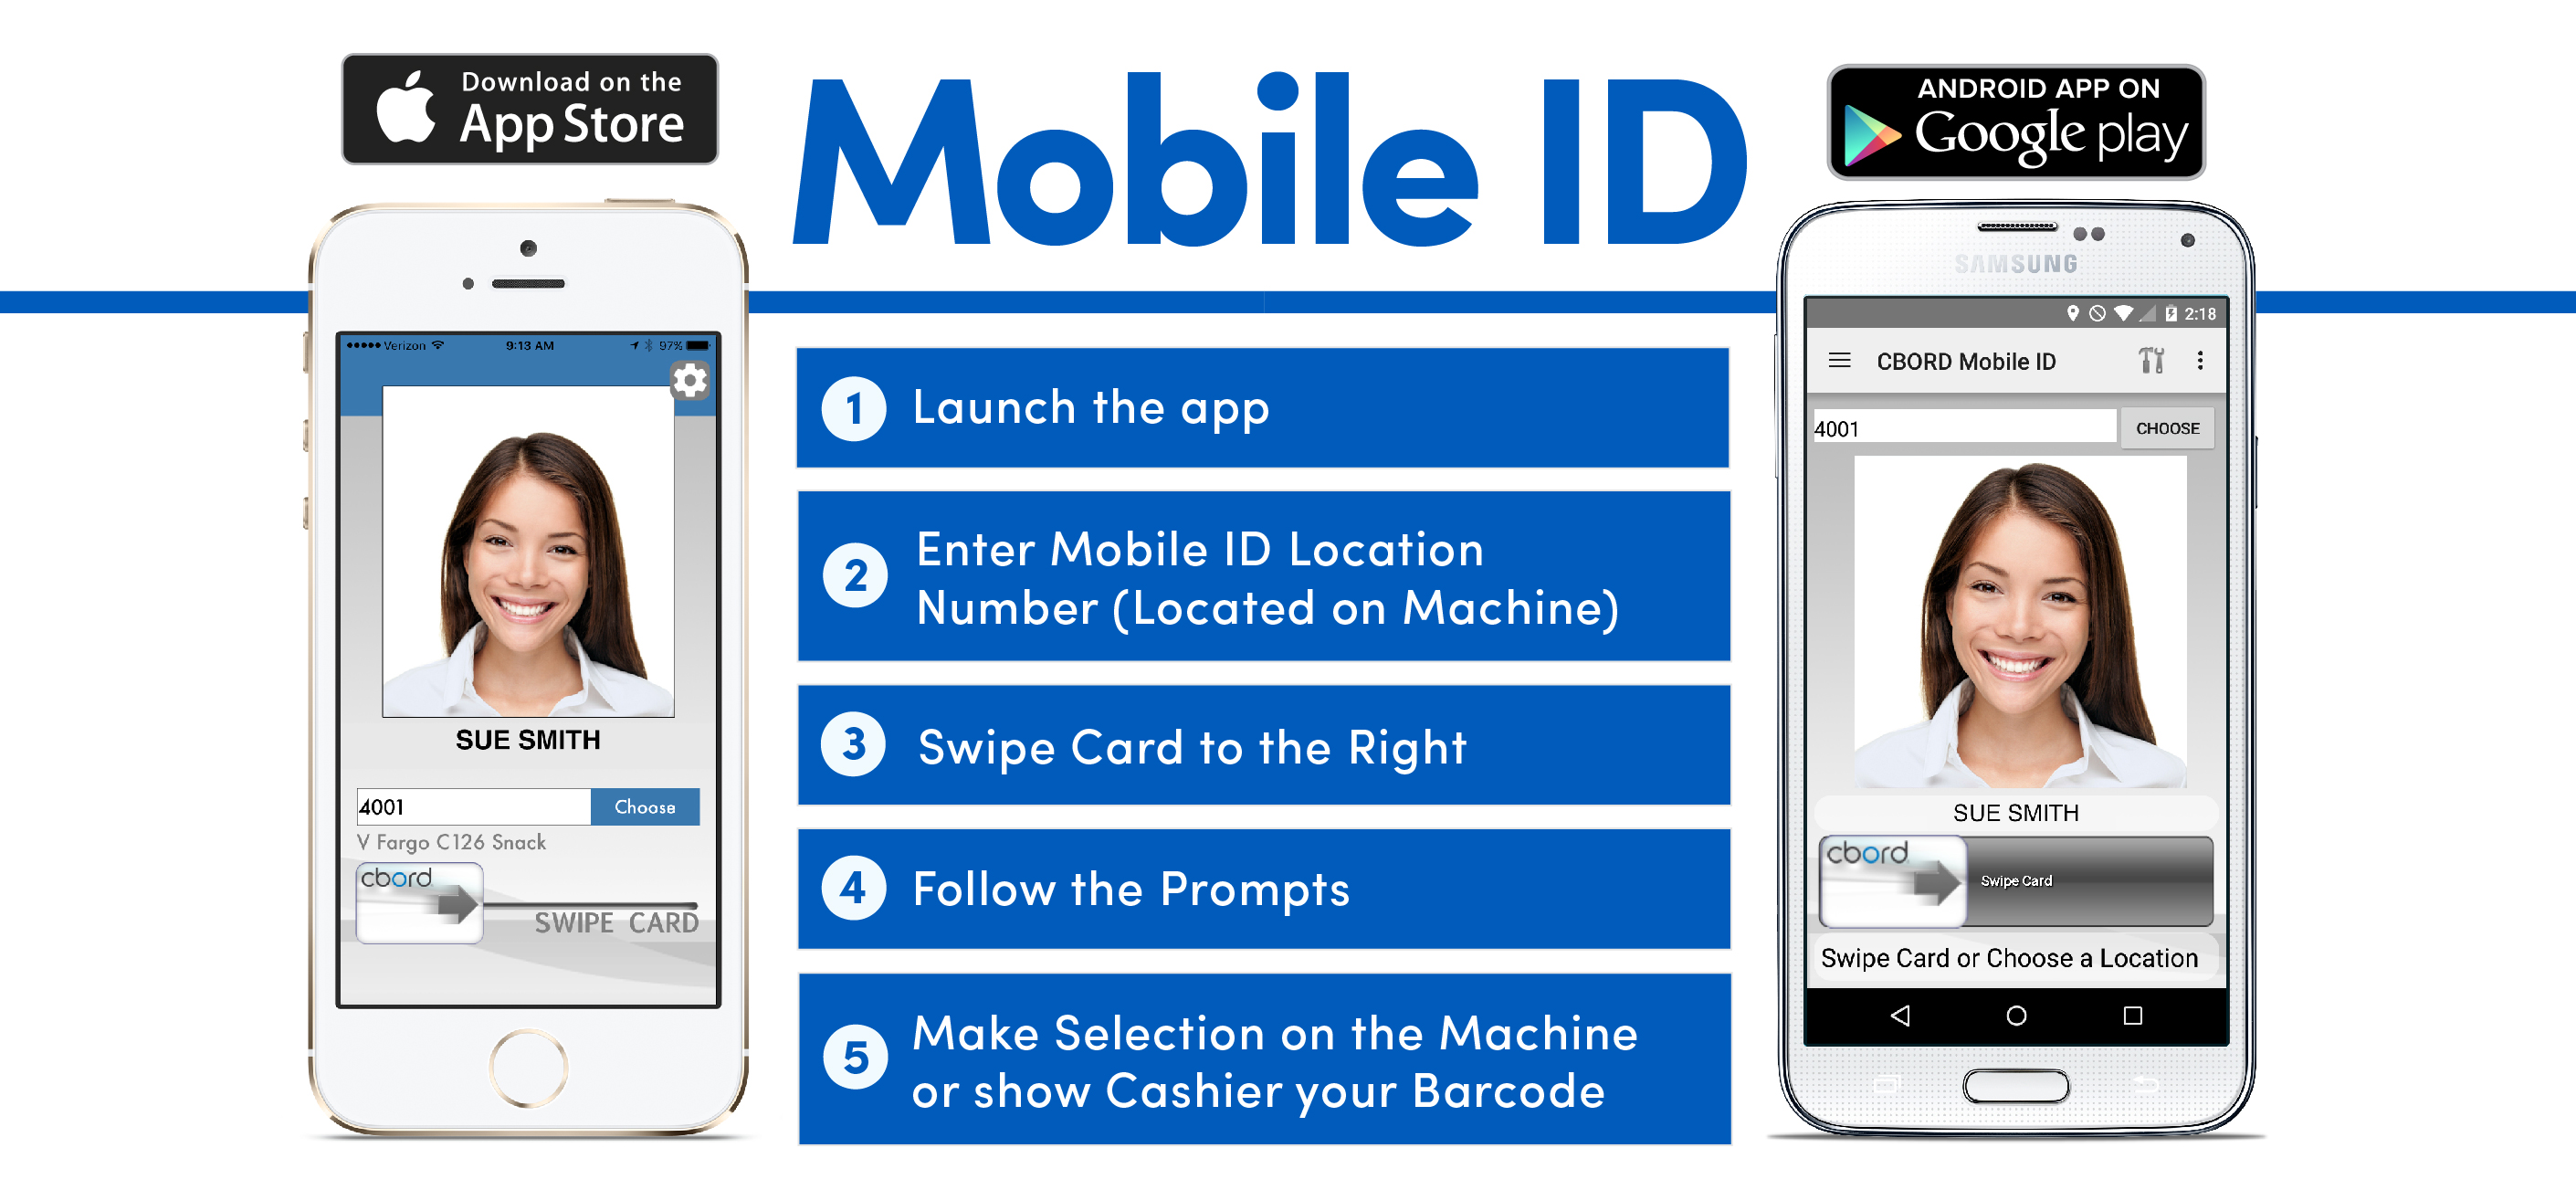 Mobile ID. Download on the App Store or Google Play. 1. Launch the app. 2. Enter Mobile ID location number (located on machine). 3. Swipe card to the right. 4. Follow the prompts. 5. Make selection on the machine or show cashier your Barcode.